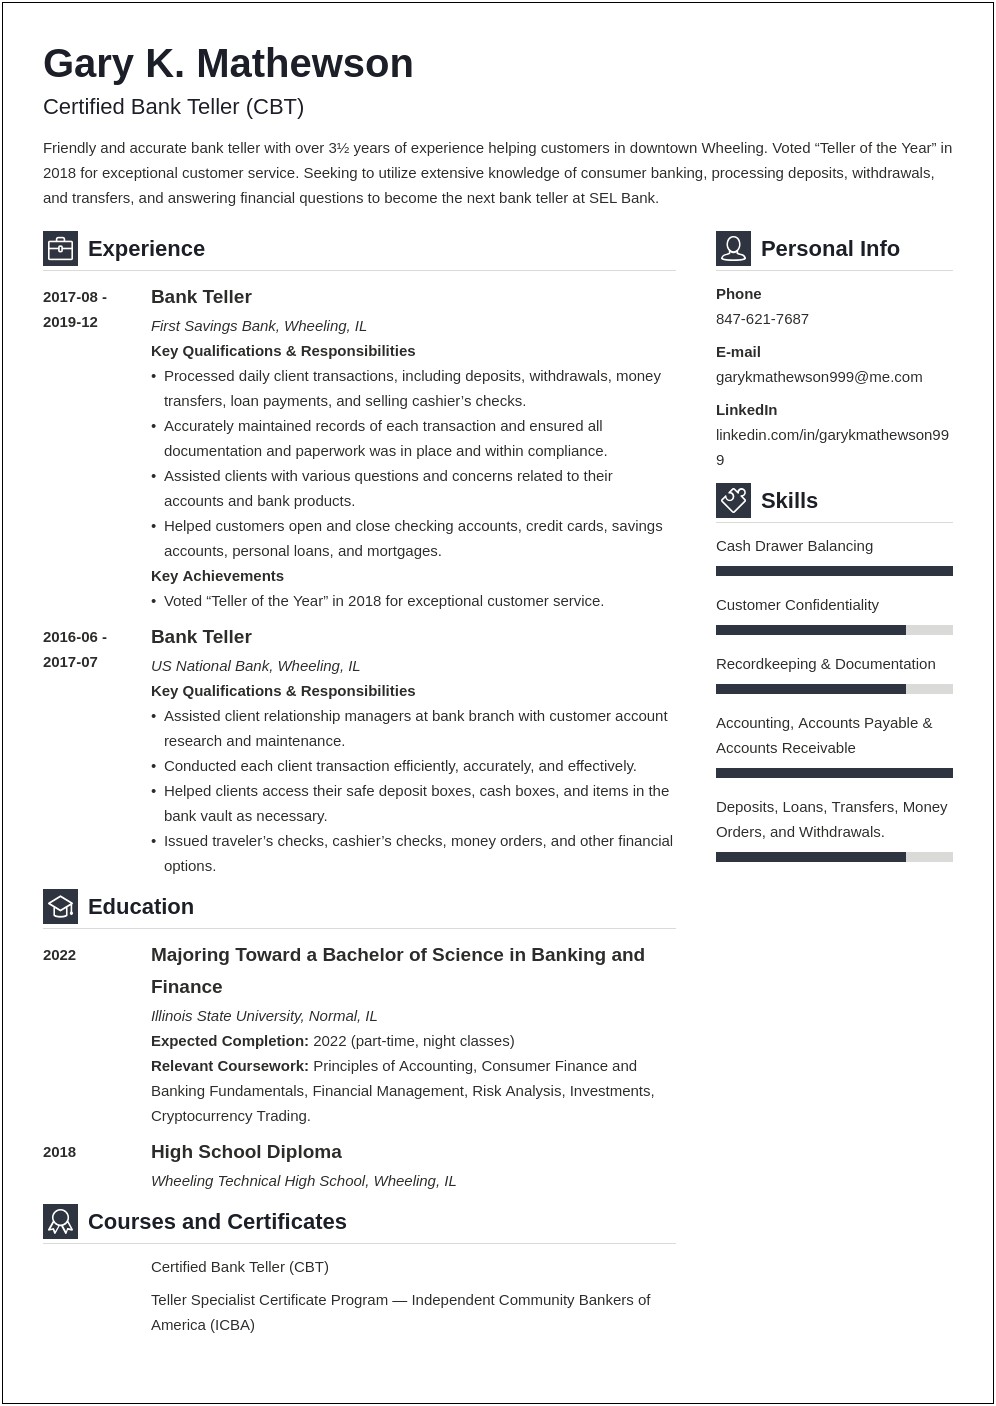 Resume Summary For A Bank Teller